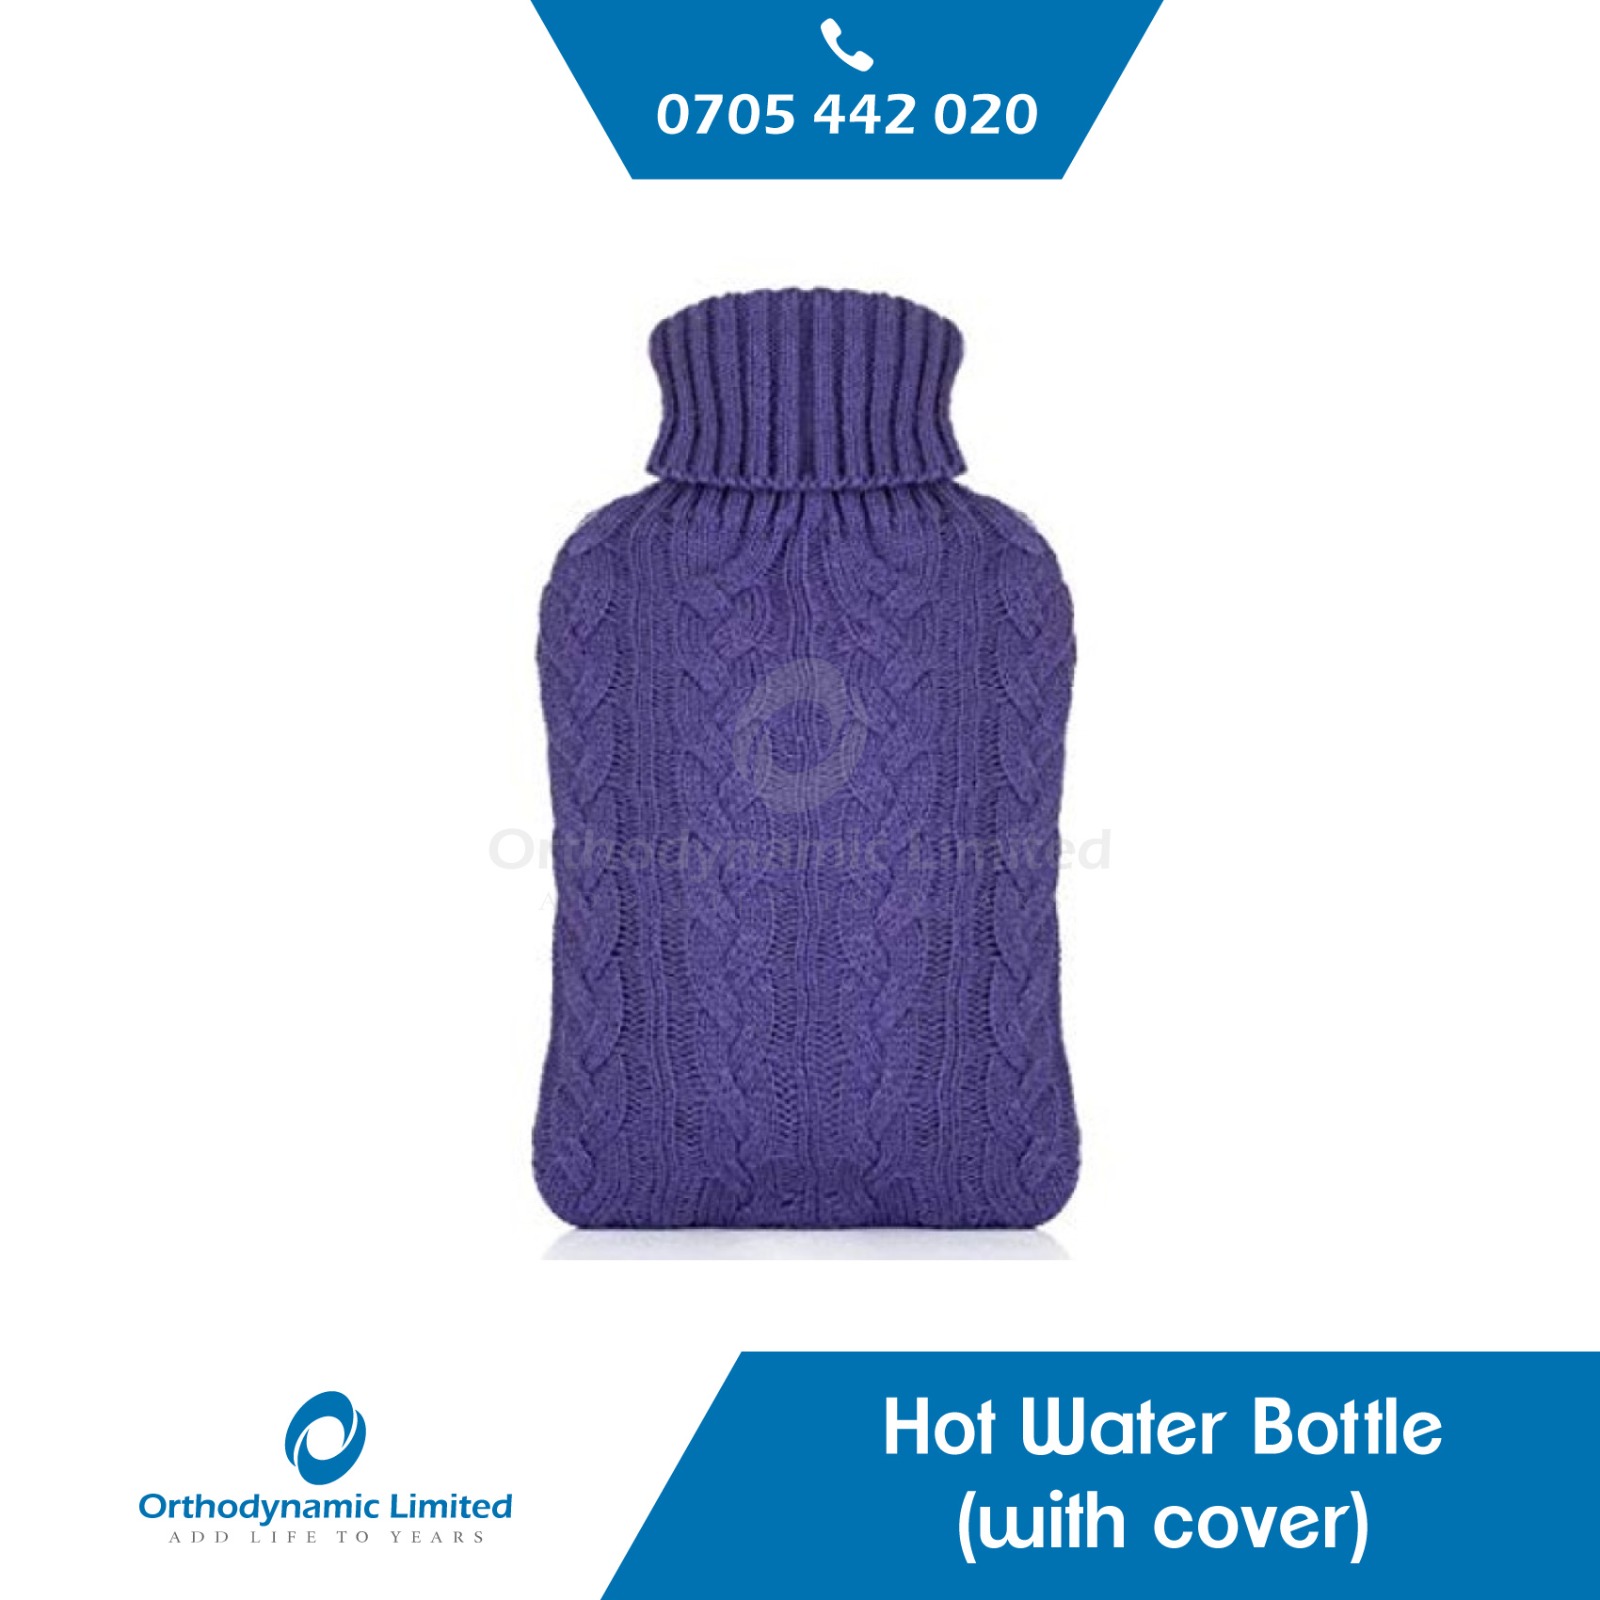 Hot water bottle with cover